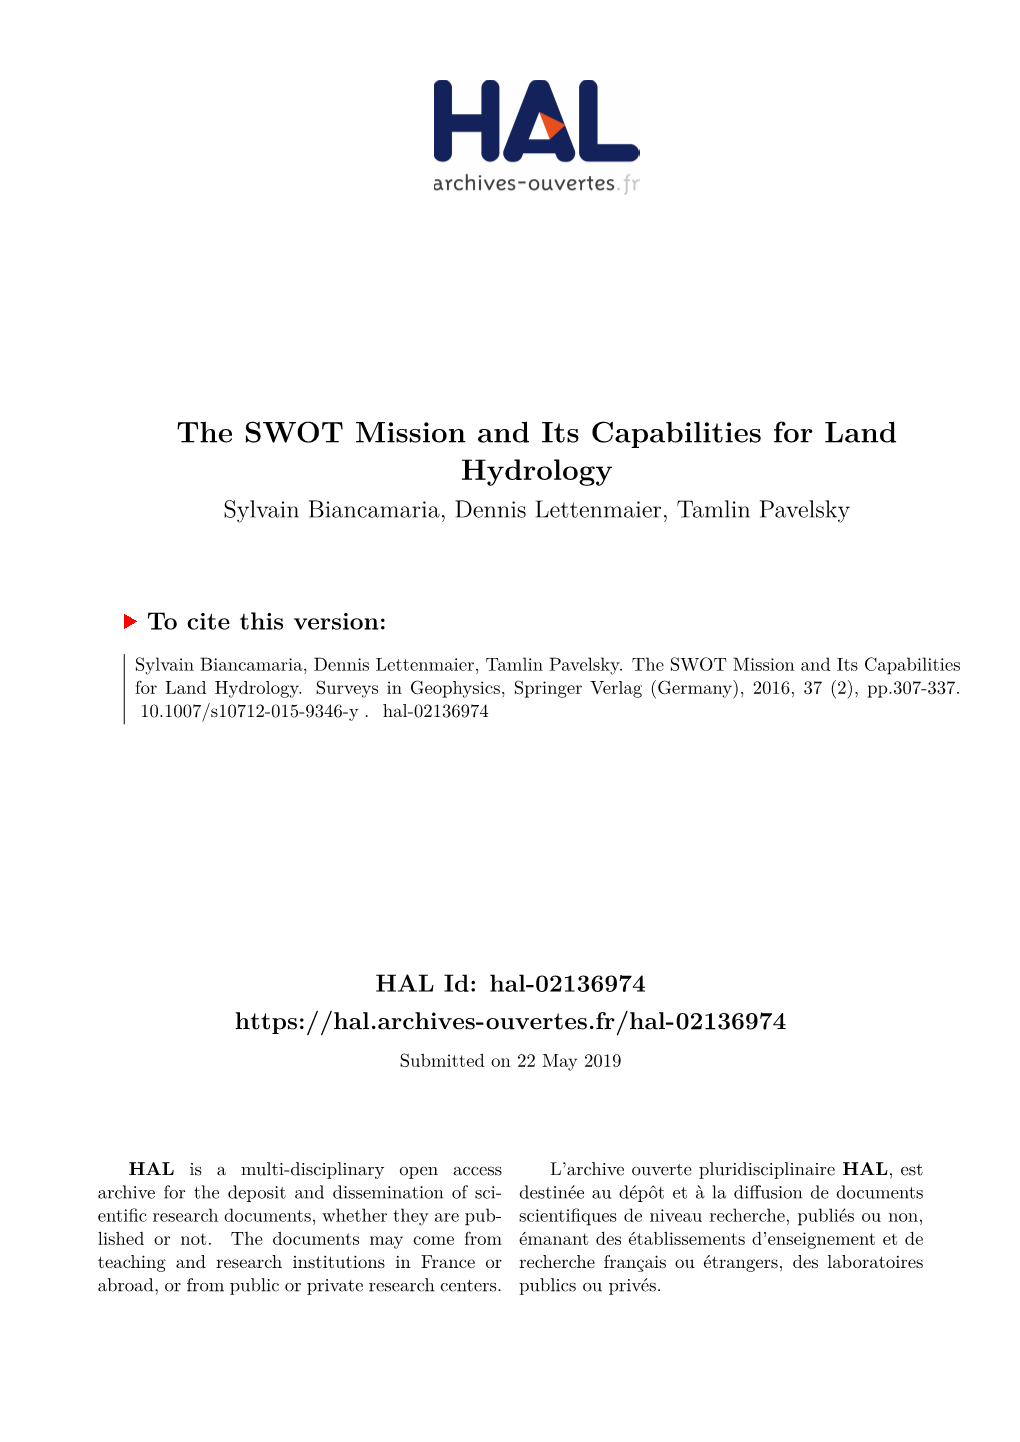 The SWOT Mission and Its Capabilities for Land Hydrology Sylvain Biancamaria, Dennis Lettenmaier, Tamlin Pavelsky